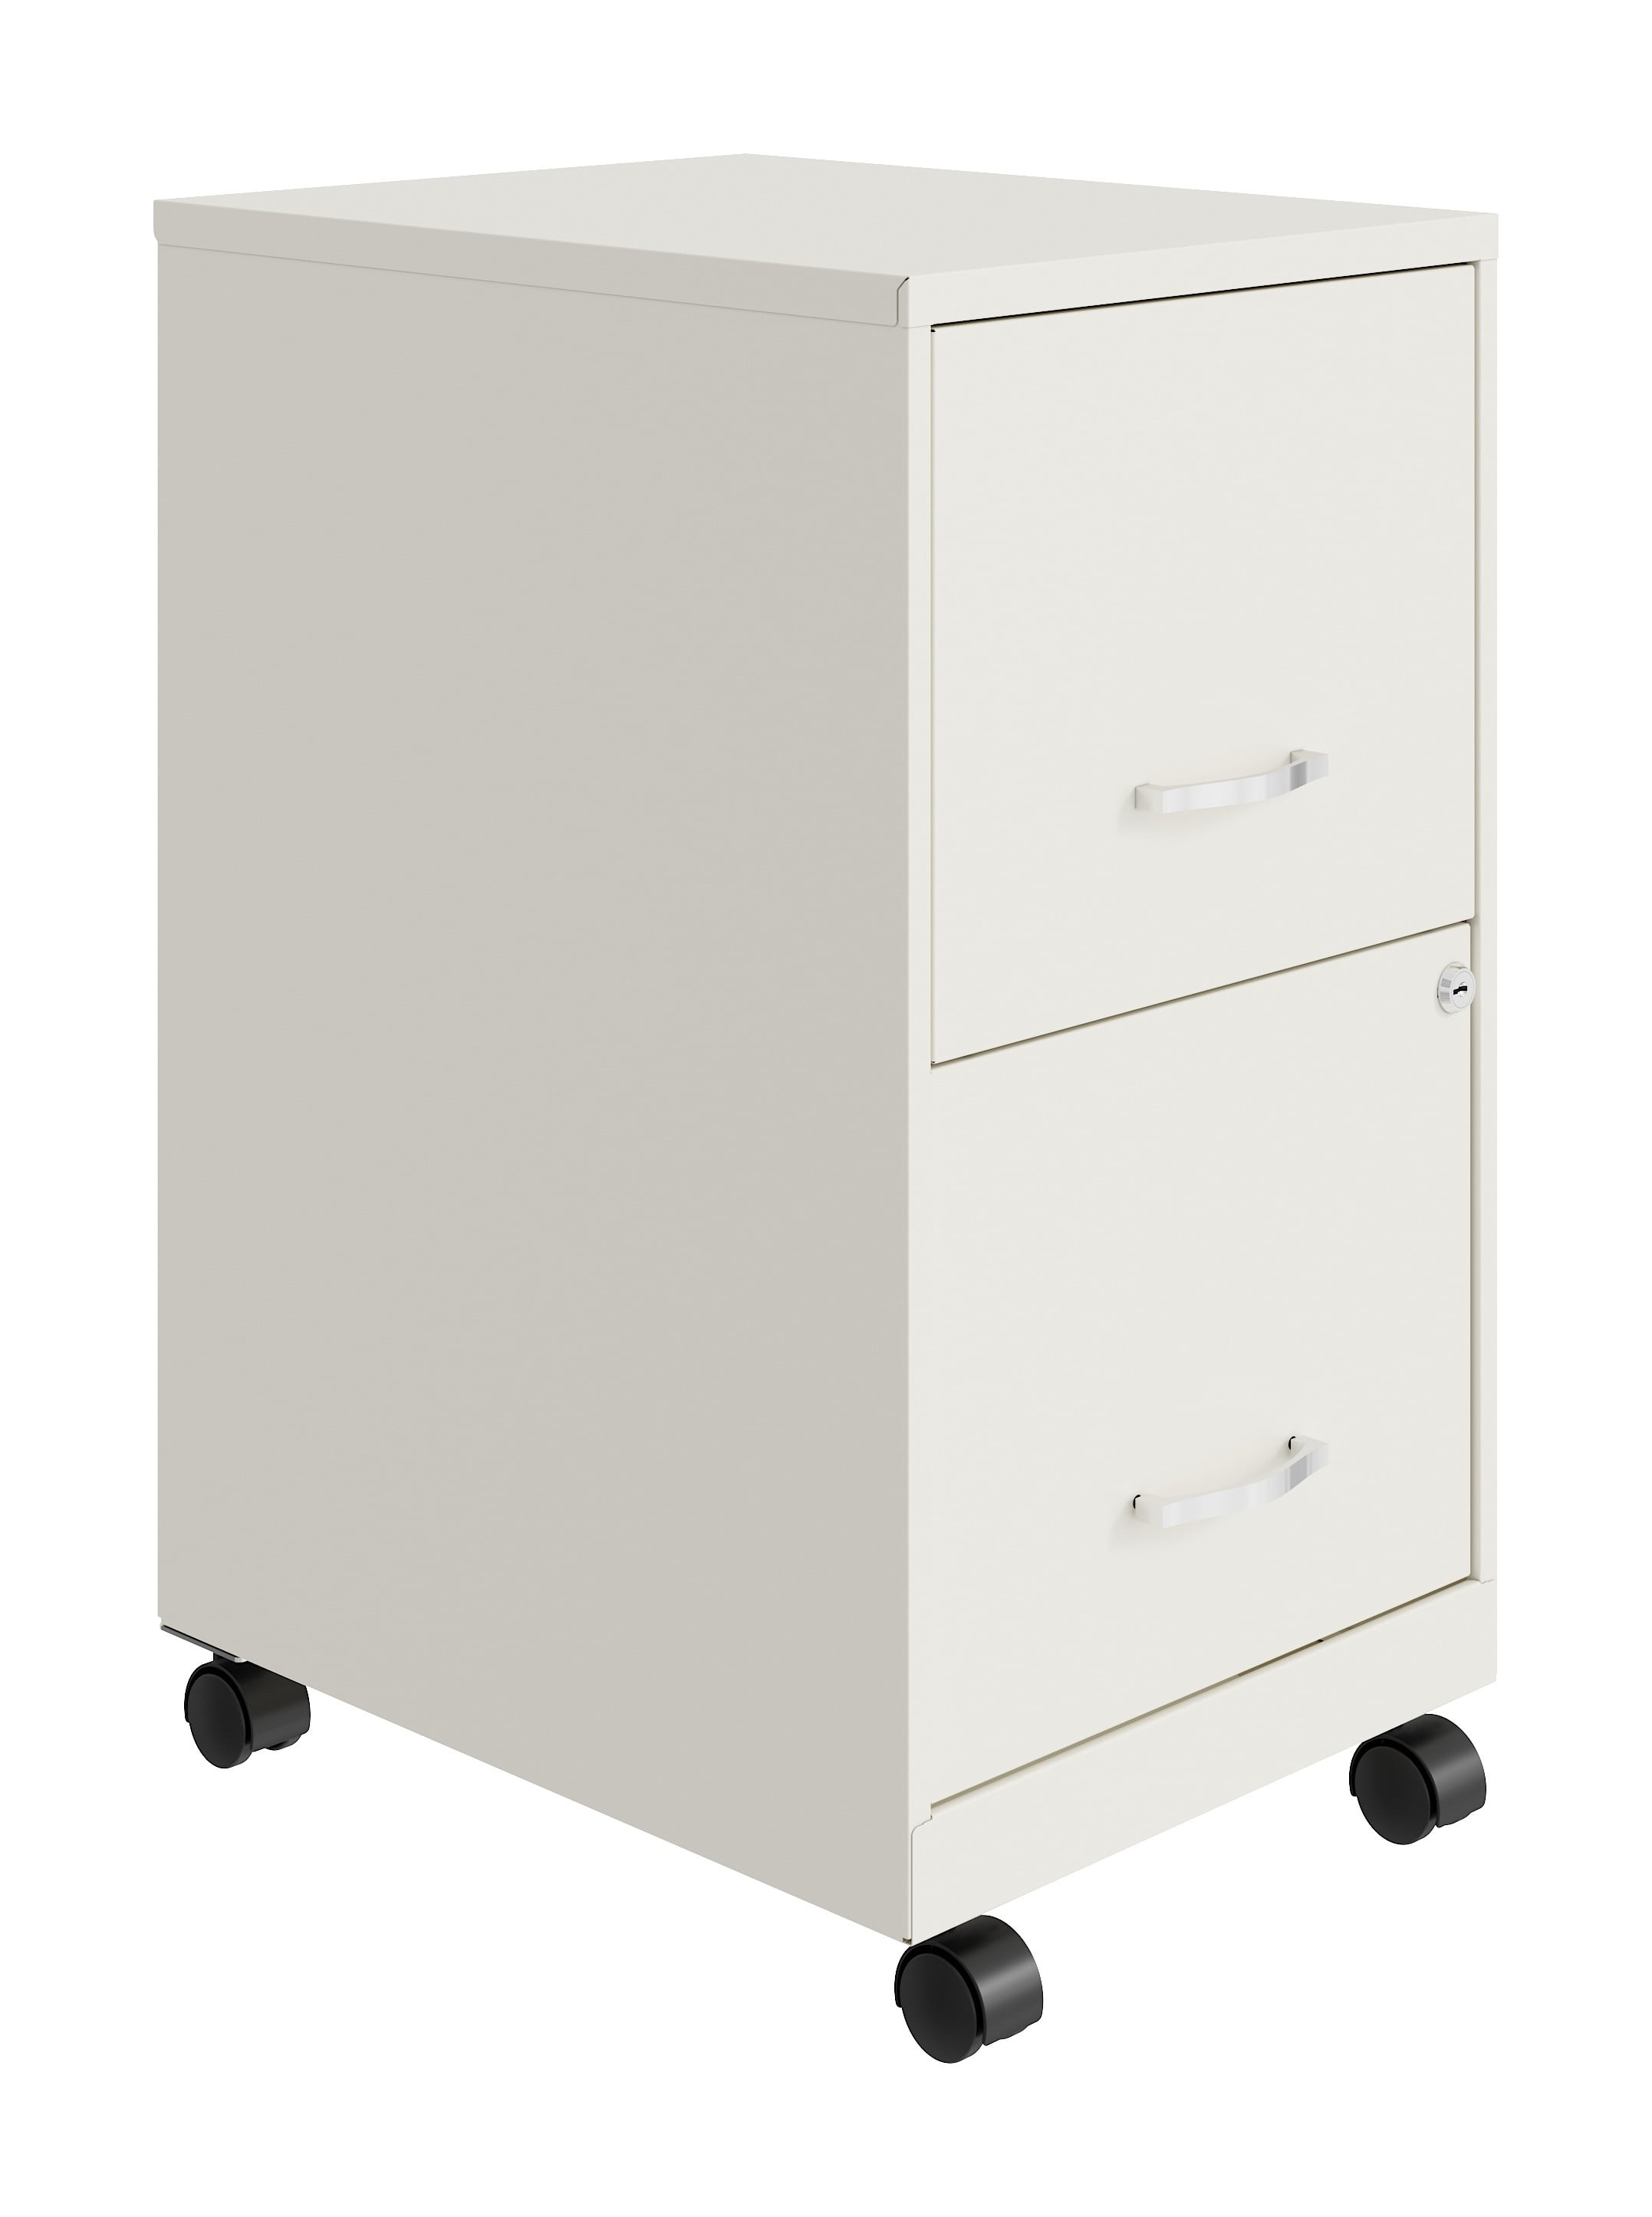 OFFICE PEDESTAL DRAWERS VERY GOOD CONDITIONS FILING CABINET 